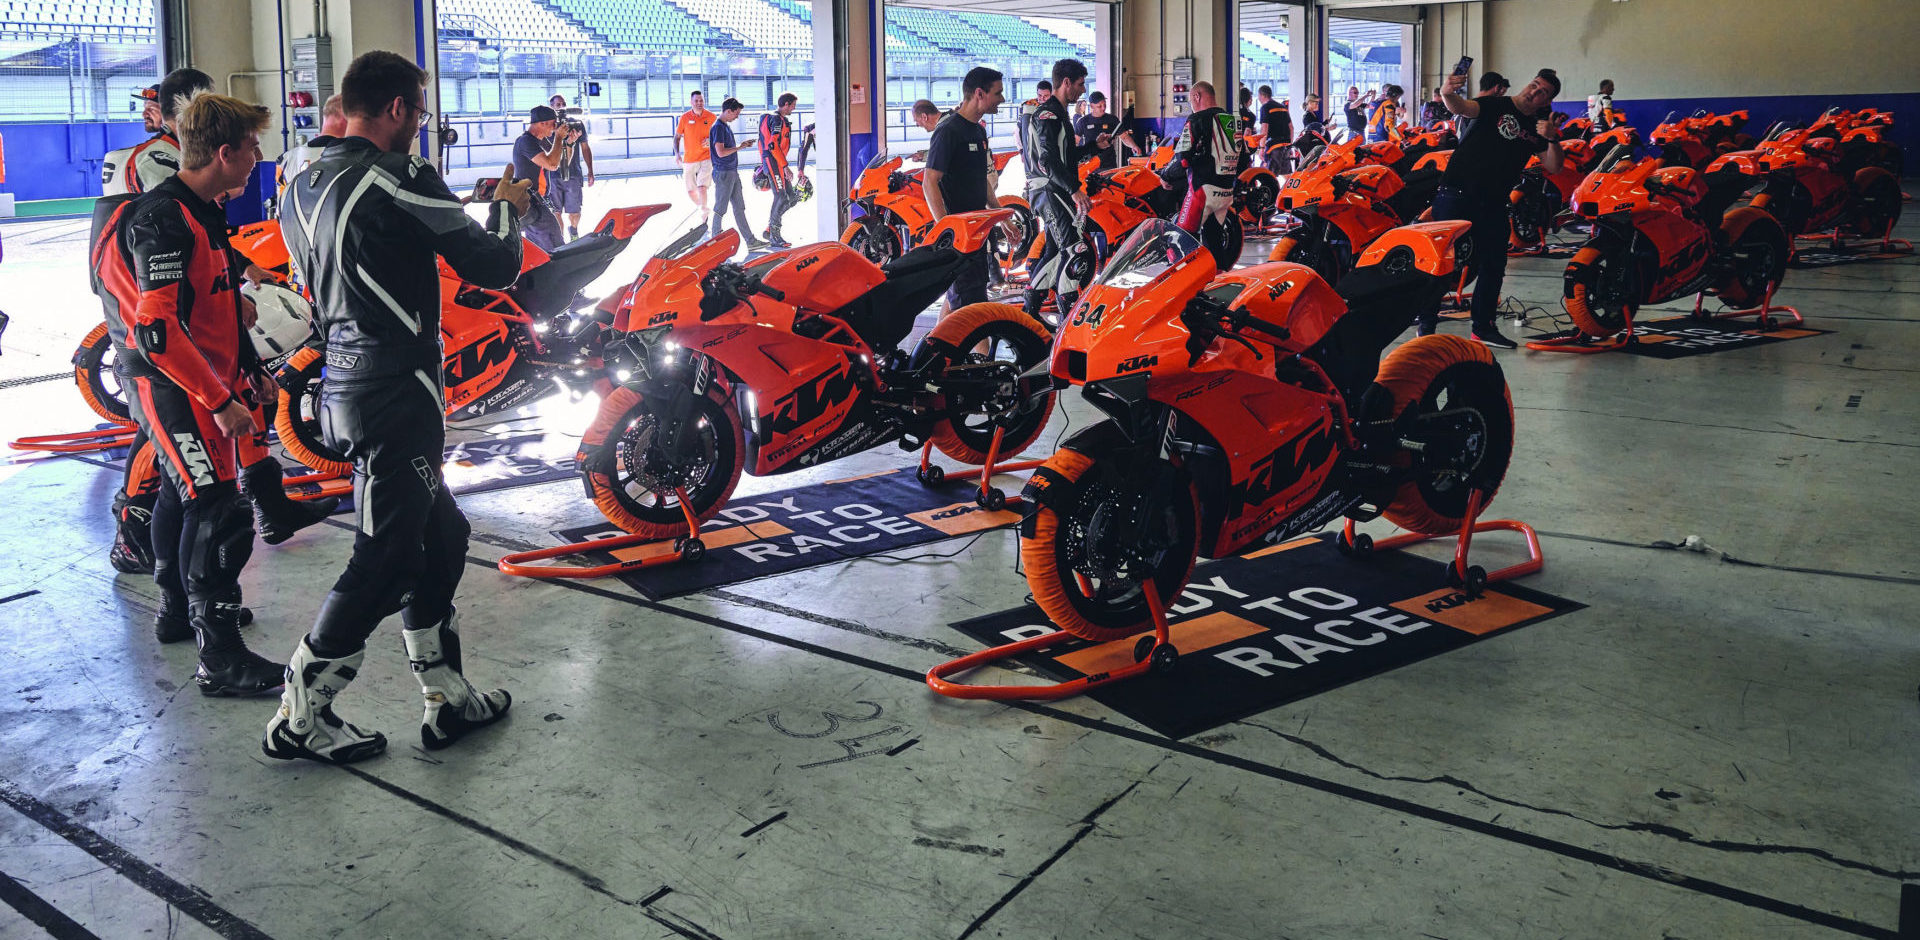 Some 25 owners of the new KTM RC 8C track-only bike received their motorcycles during a special event at Jerez, in Spain. Photo by @francescmonterophoto, courtesy KTM.